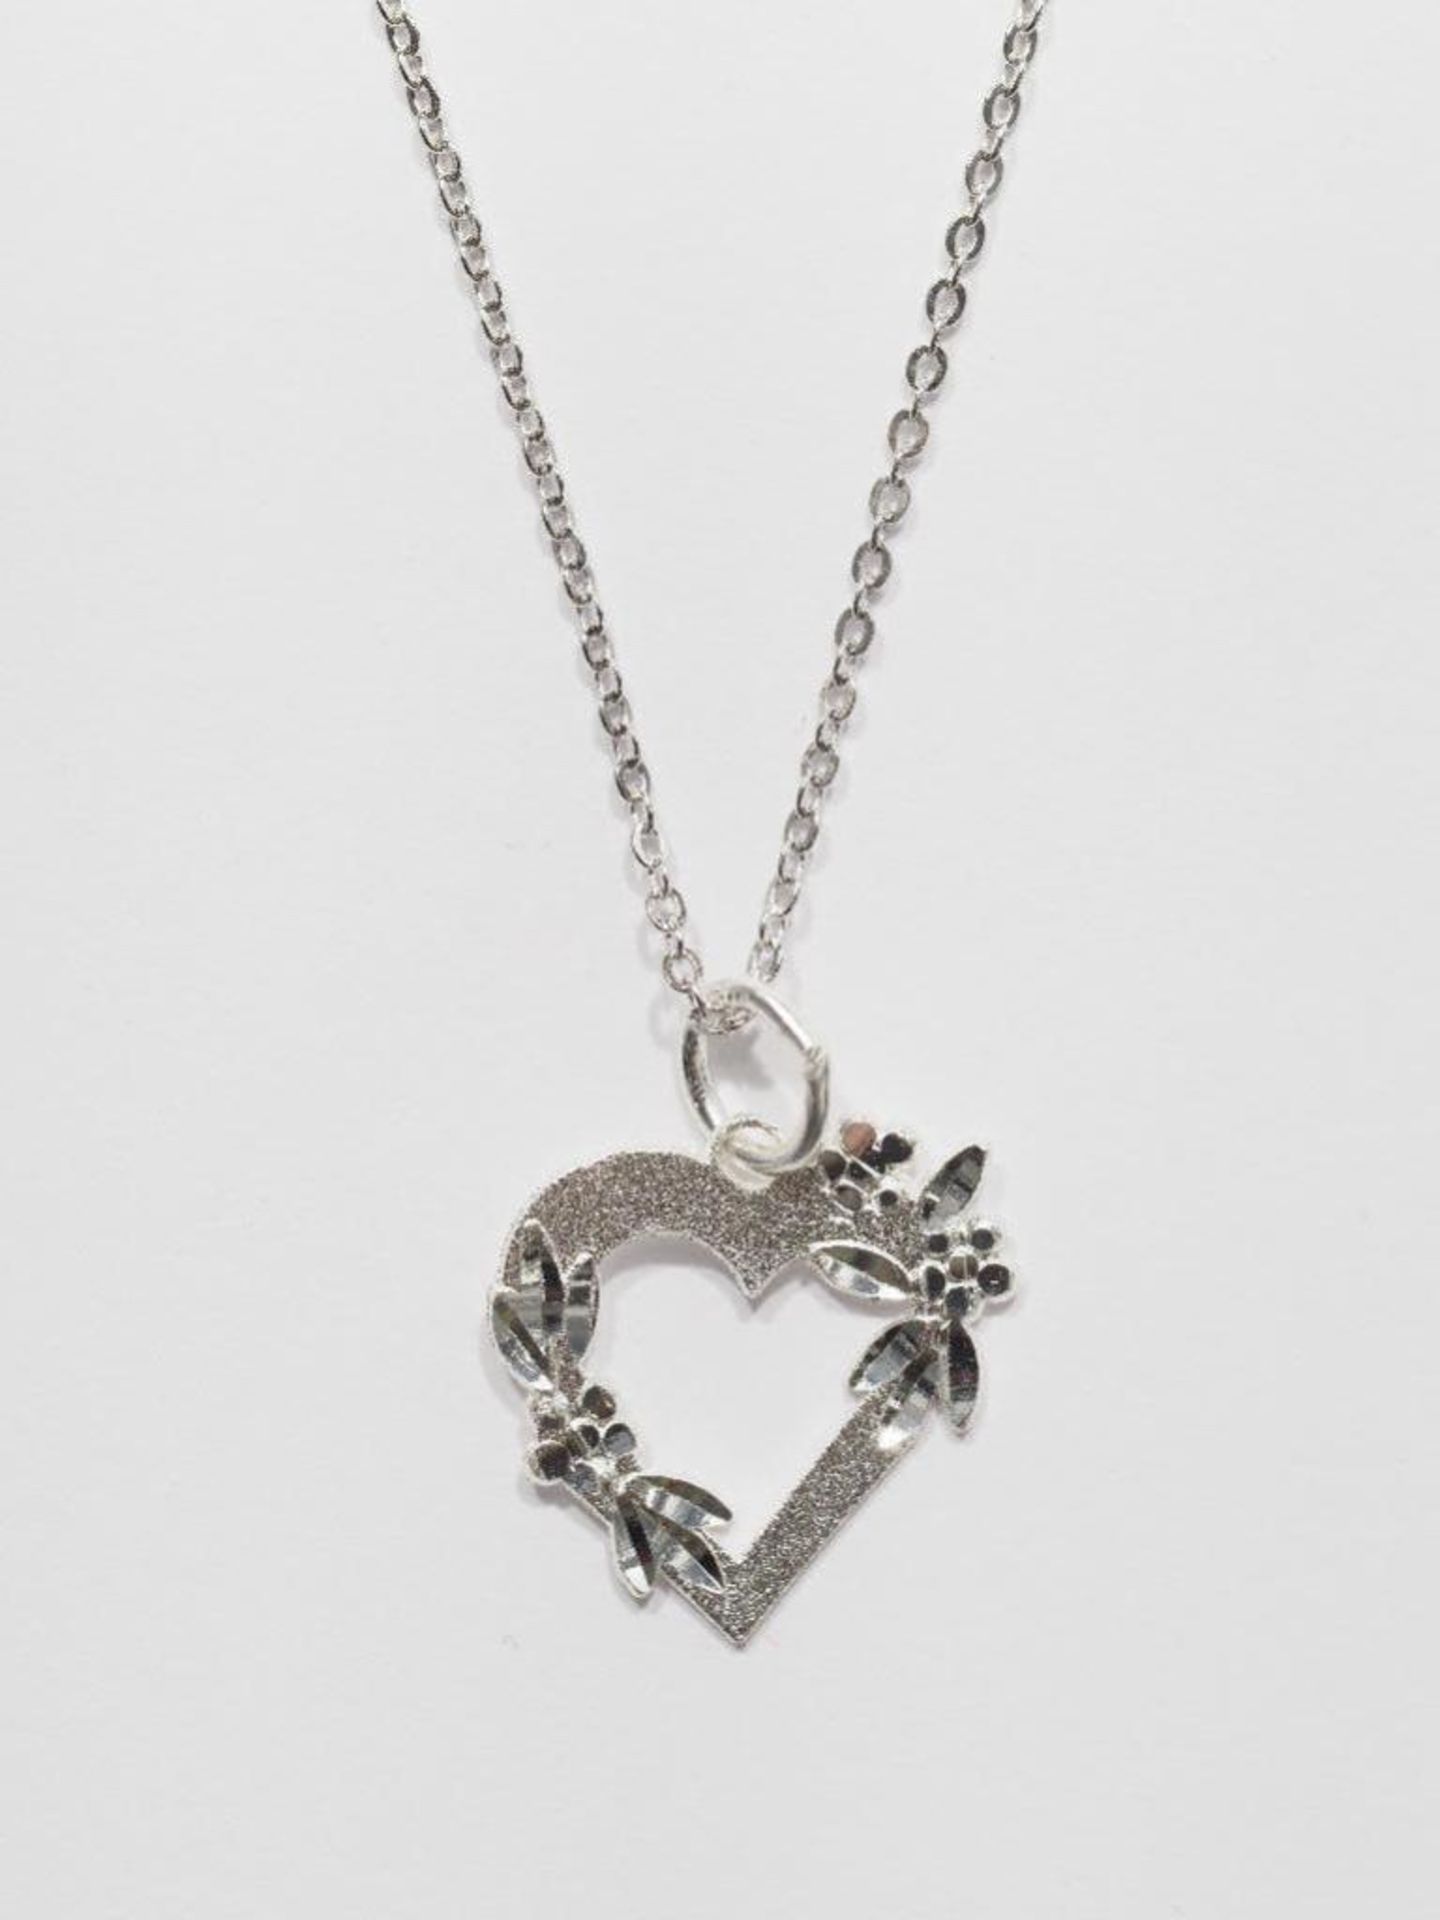 Sterling Silver Heart Shaped Pendant Necklace. Retail $120 - Image 2 of 2